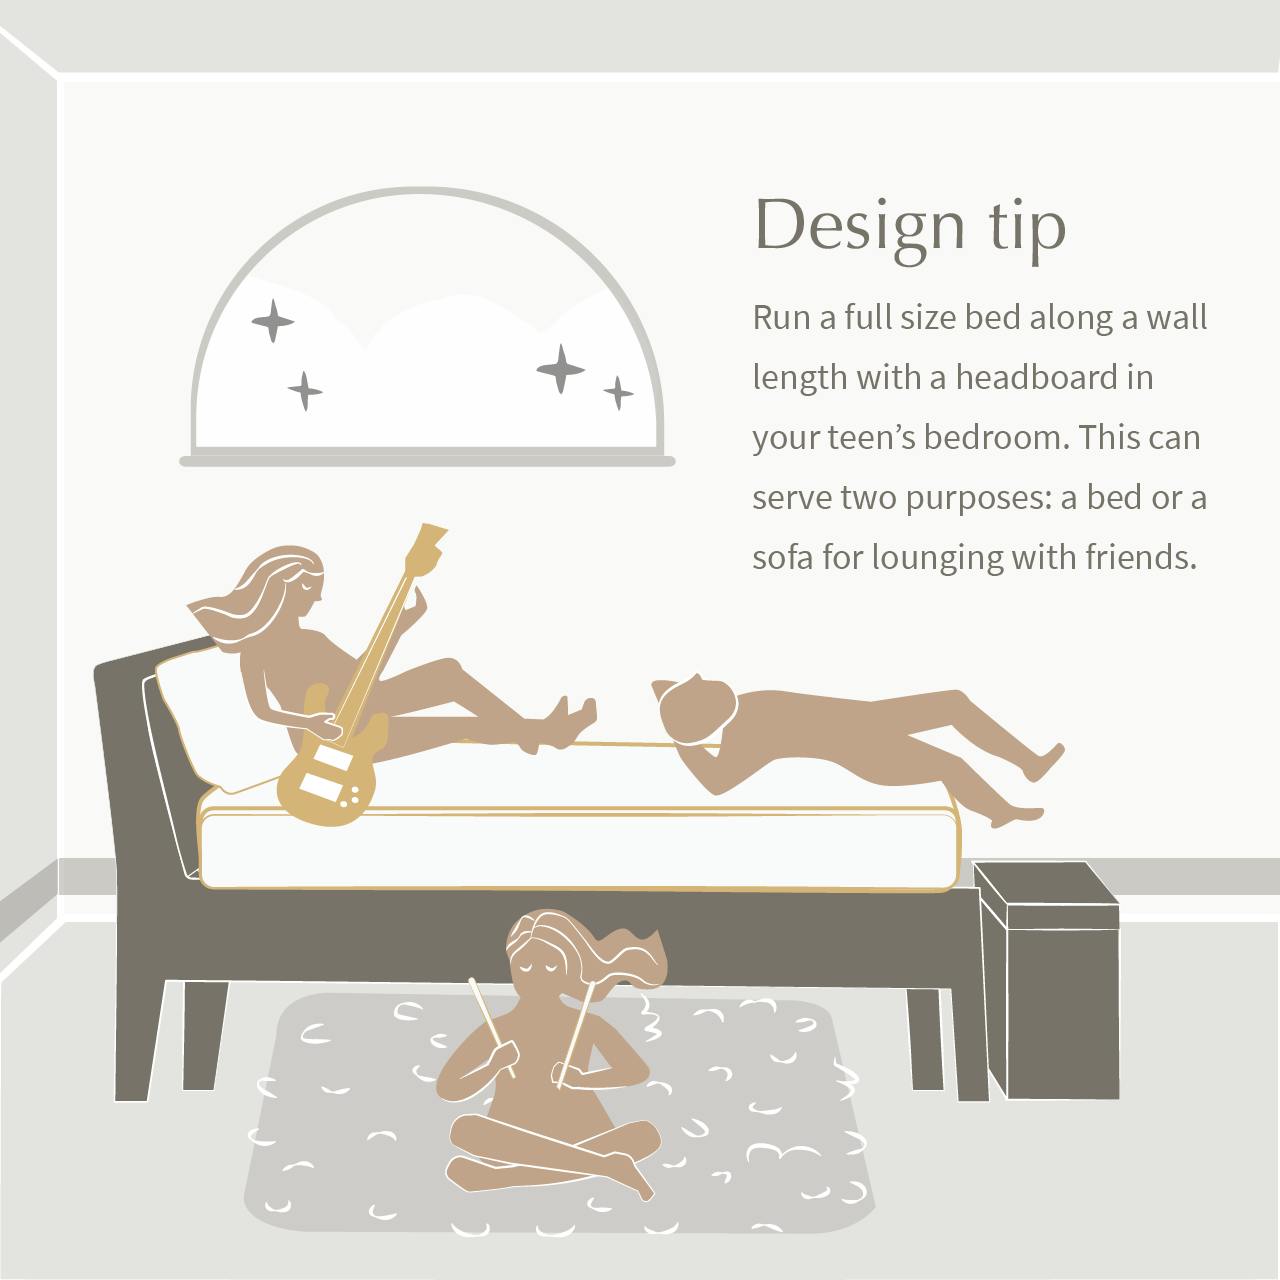 illustration showing teenagers lying on full size bed and sitting in bedroom